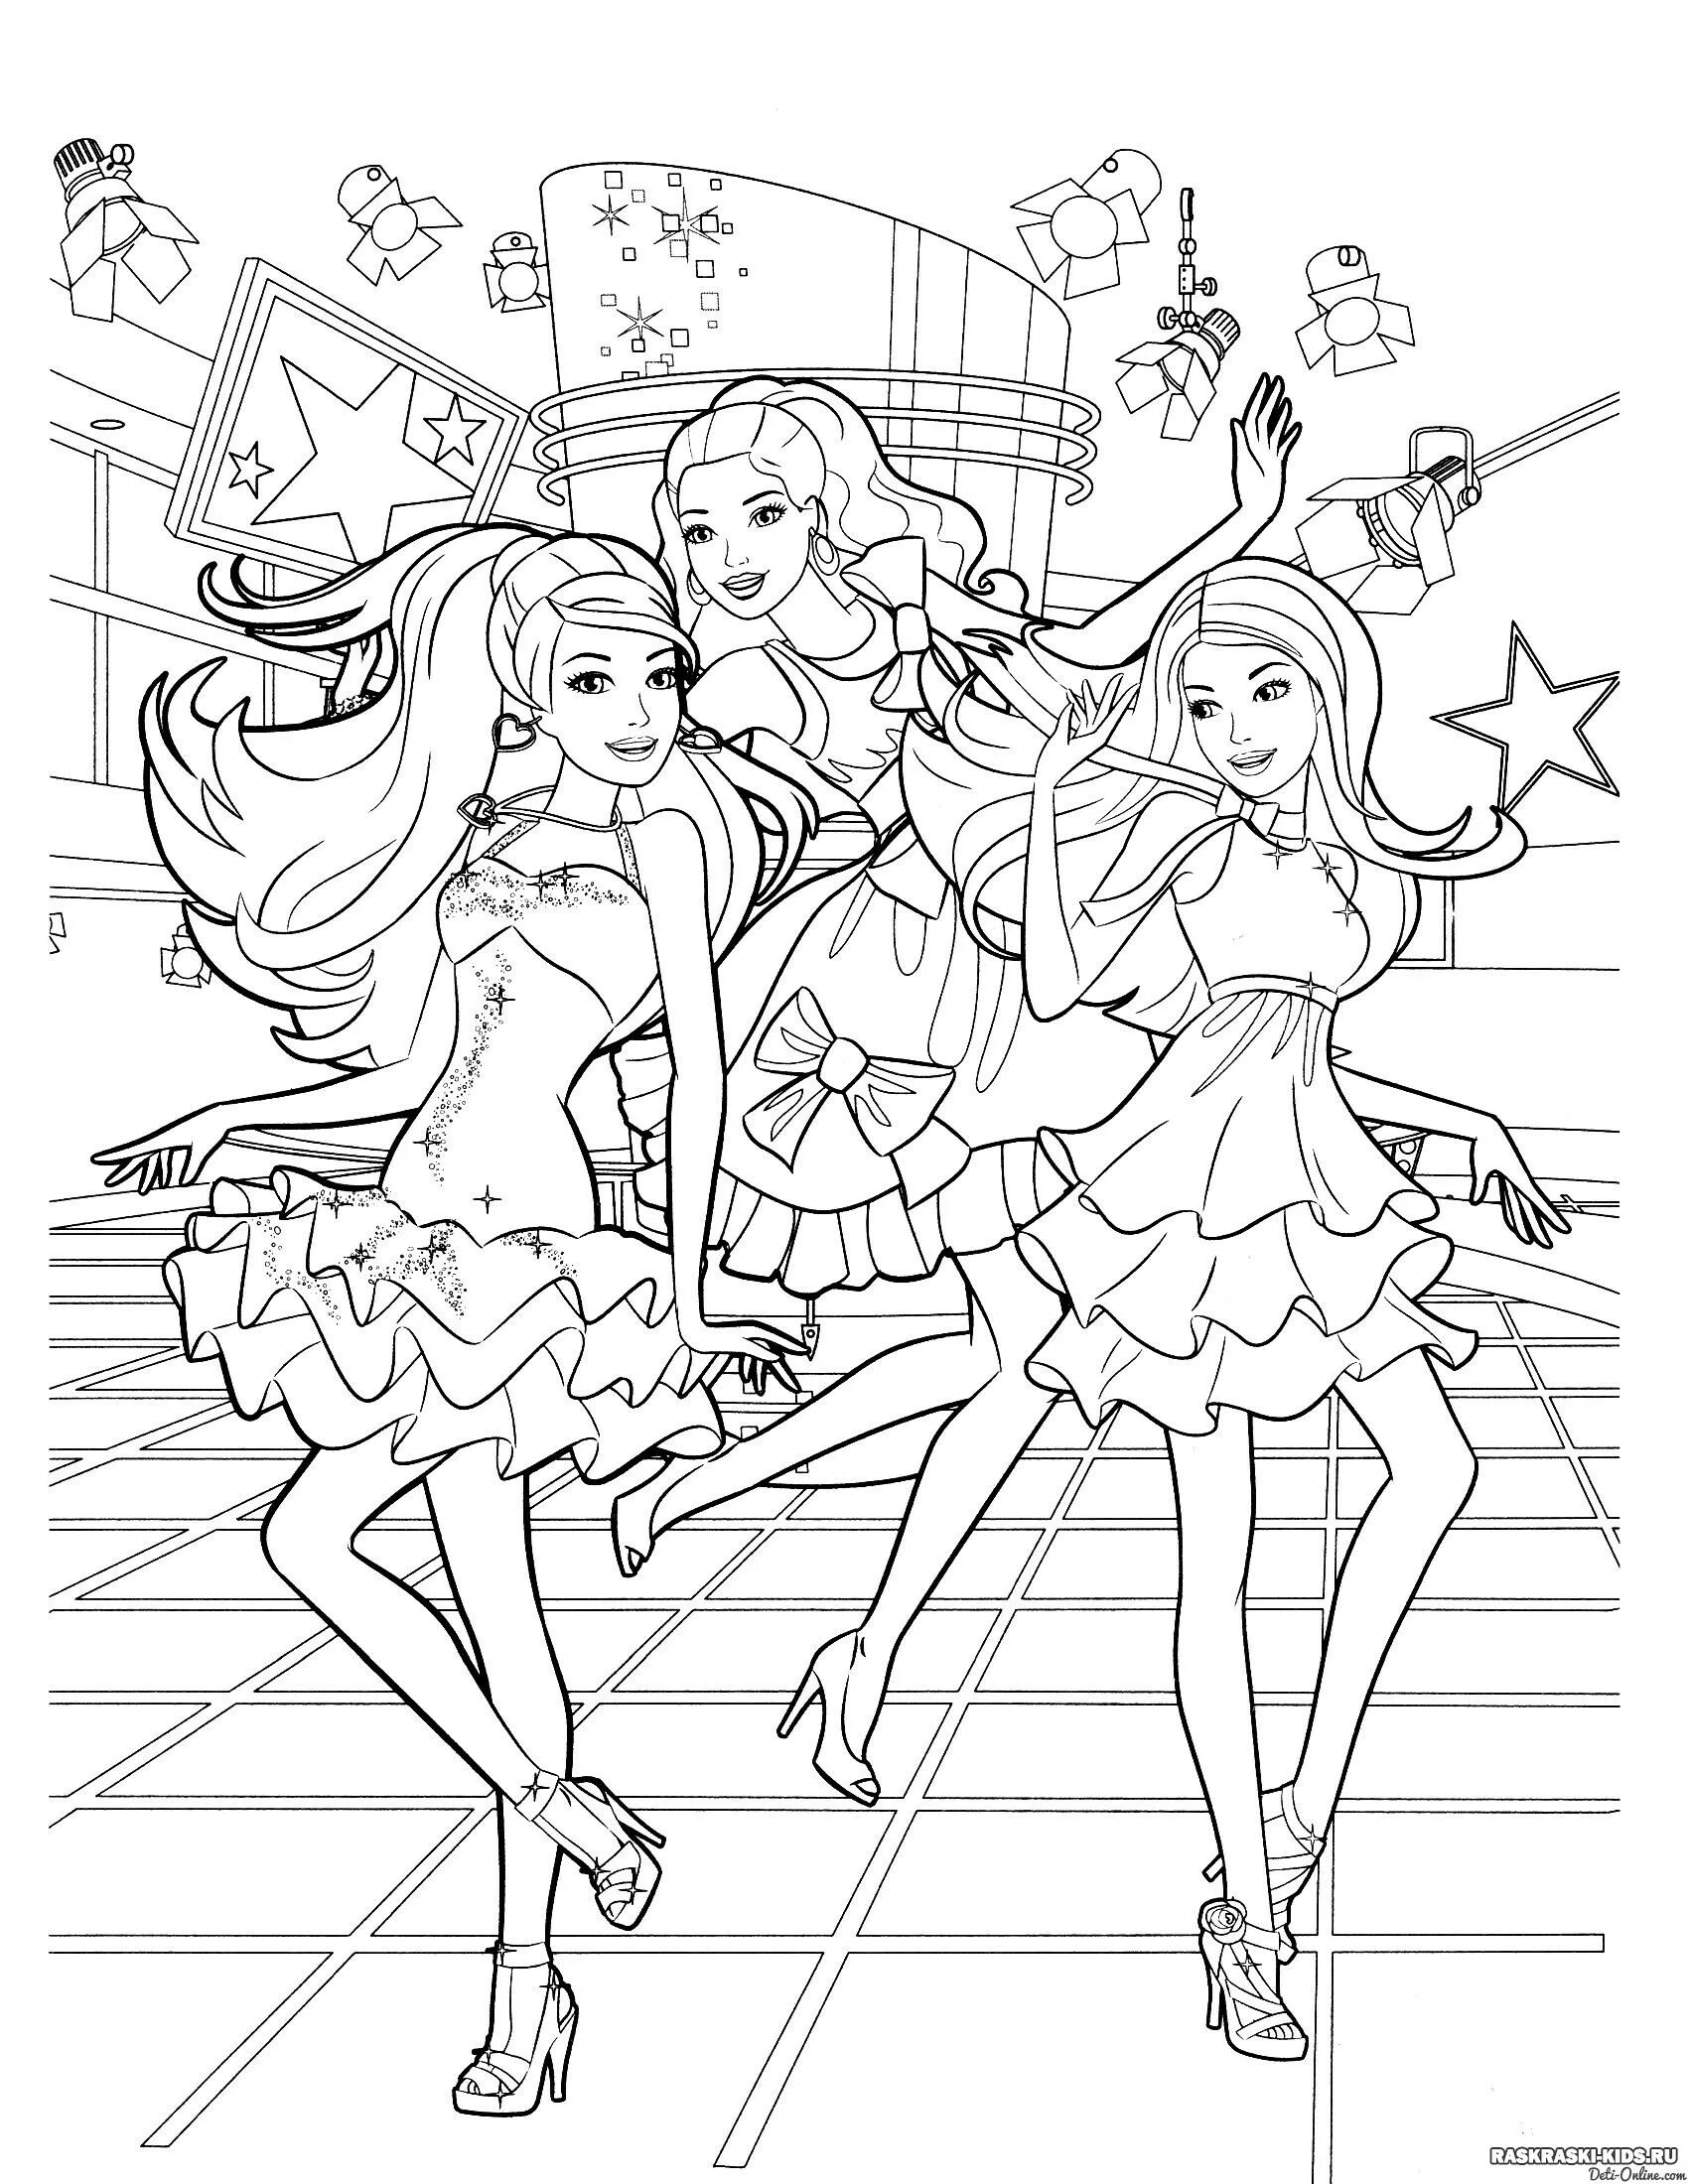 Jazzy barbie coloring book